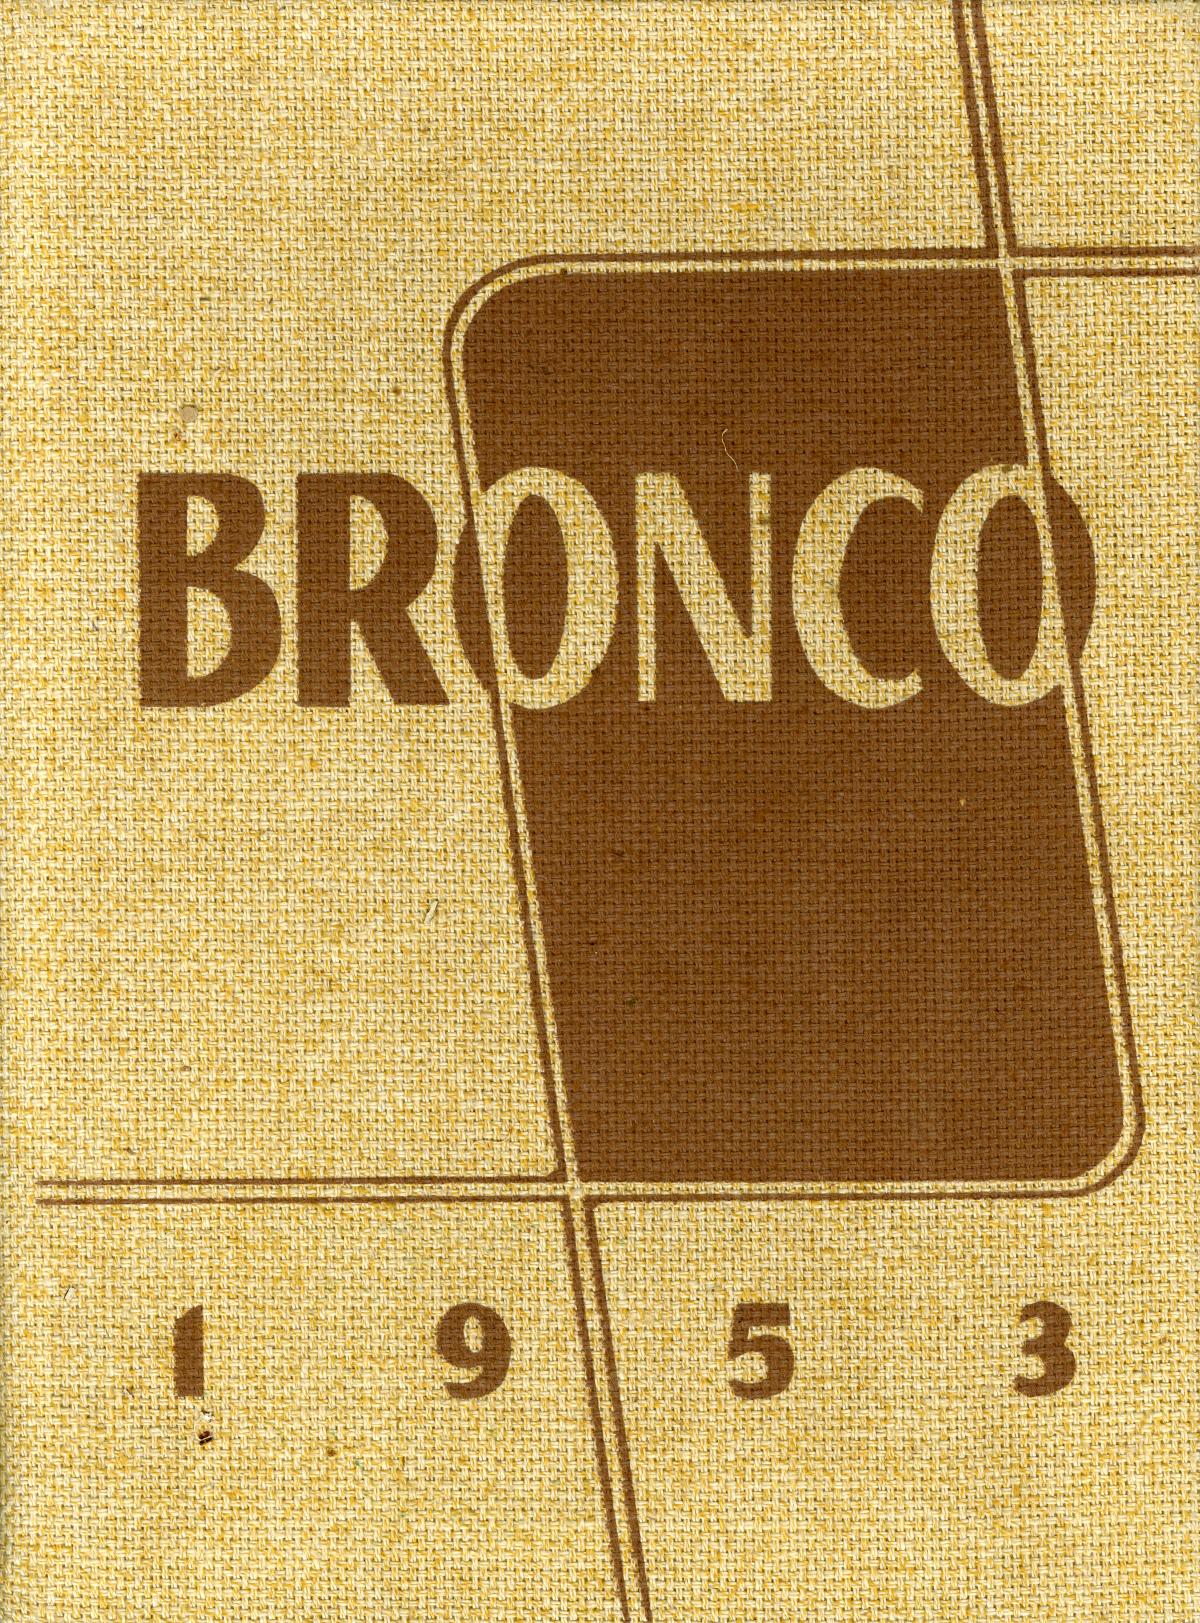 The Bronco, Yearbook of Hardin-Simmons University, 1953
                                                
                                                    Front Cover
                                                